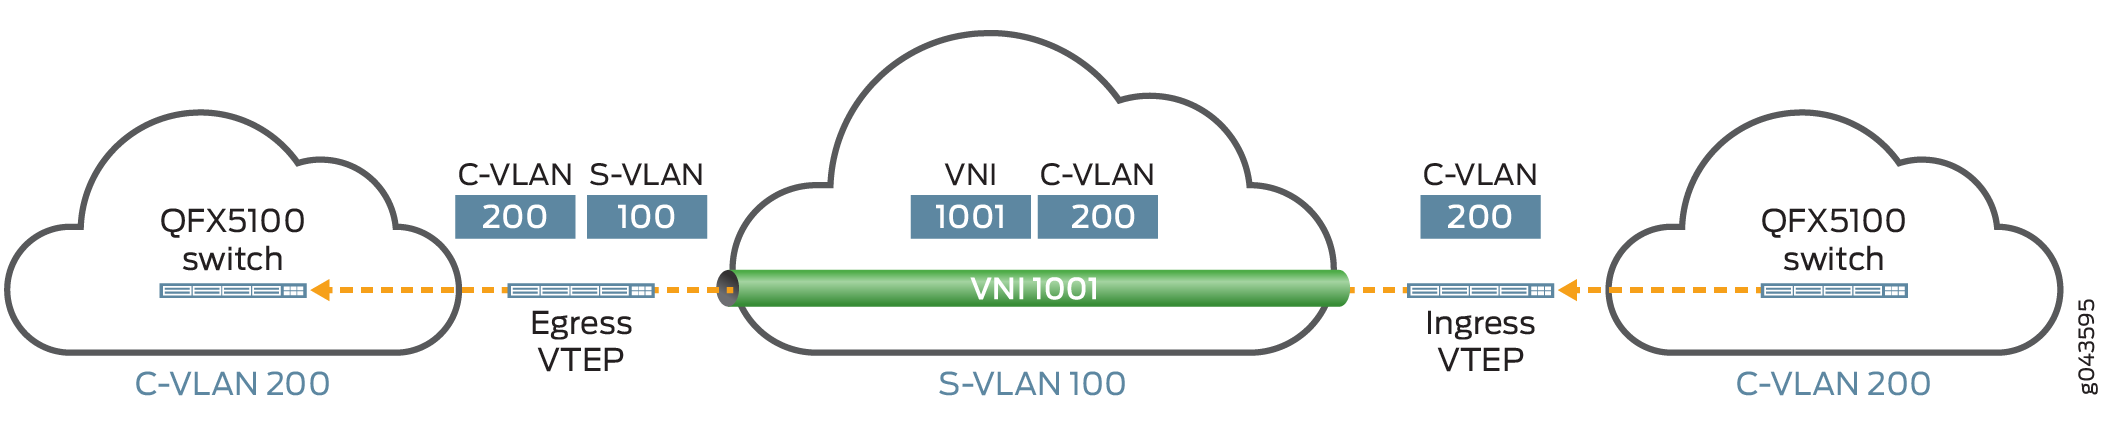 Mapping a Range of C-VLANs to an S-VLAN